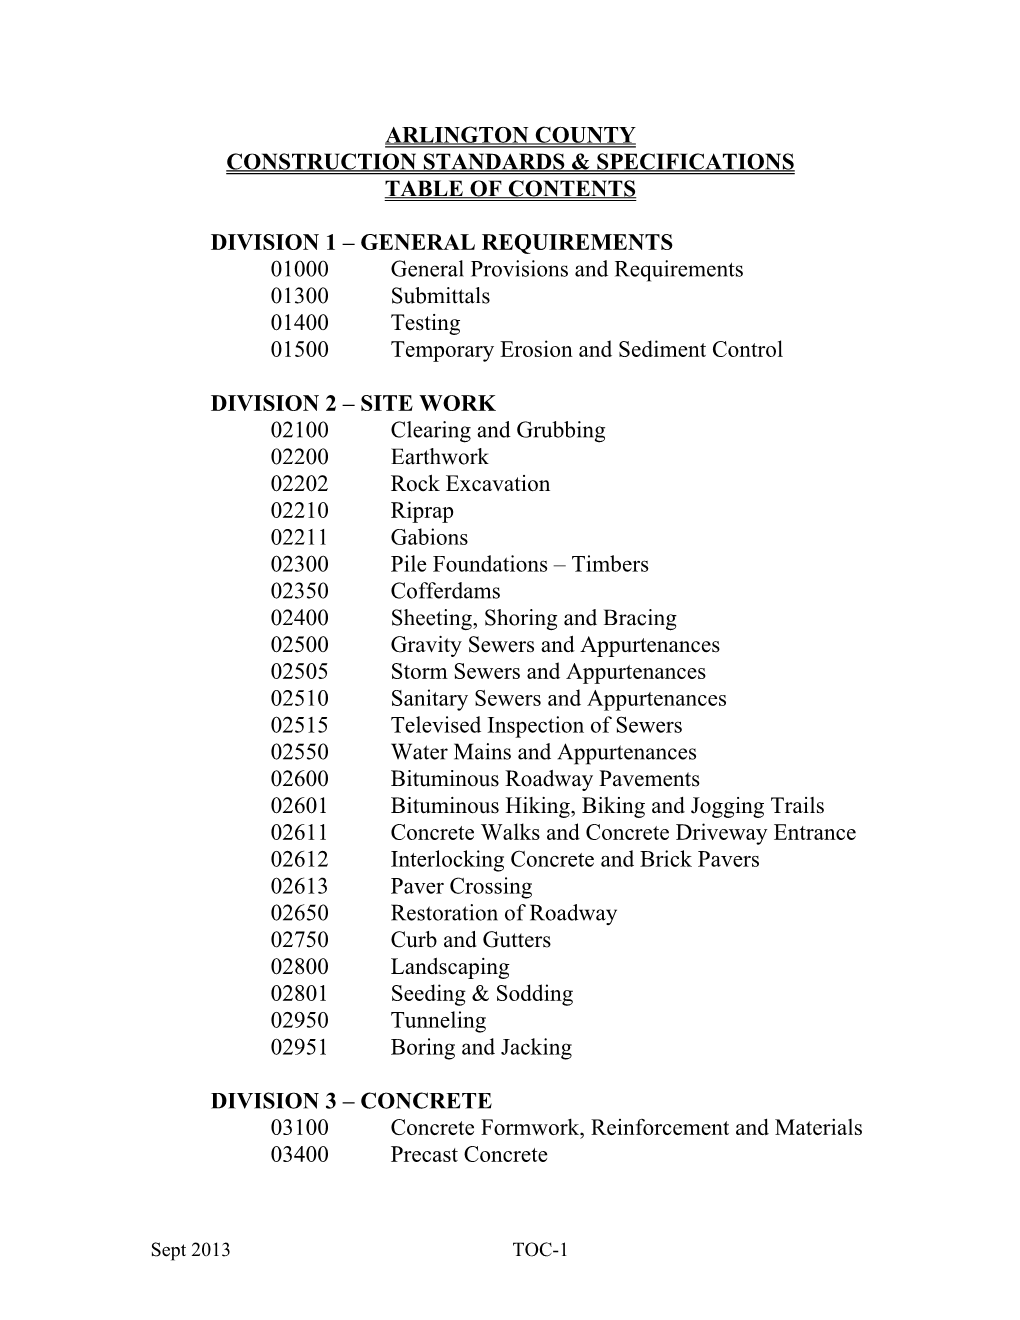 ARLINGTON COUNTY CONSTRUCTION STANDARDS & SPECIFICATIONS TABLE of CONTENTS DIVISION 1 – GENERAL REQUIREMENTS 01000 Gener